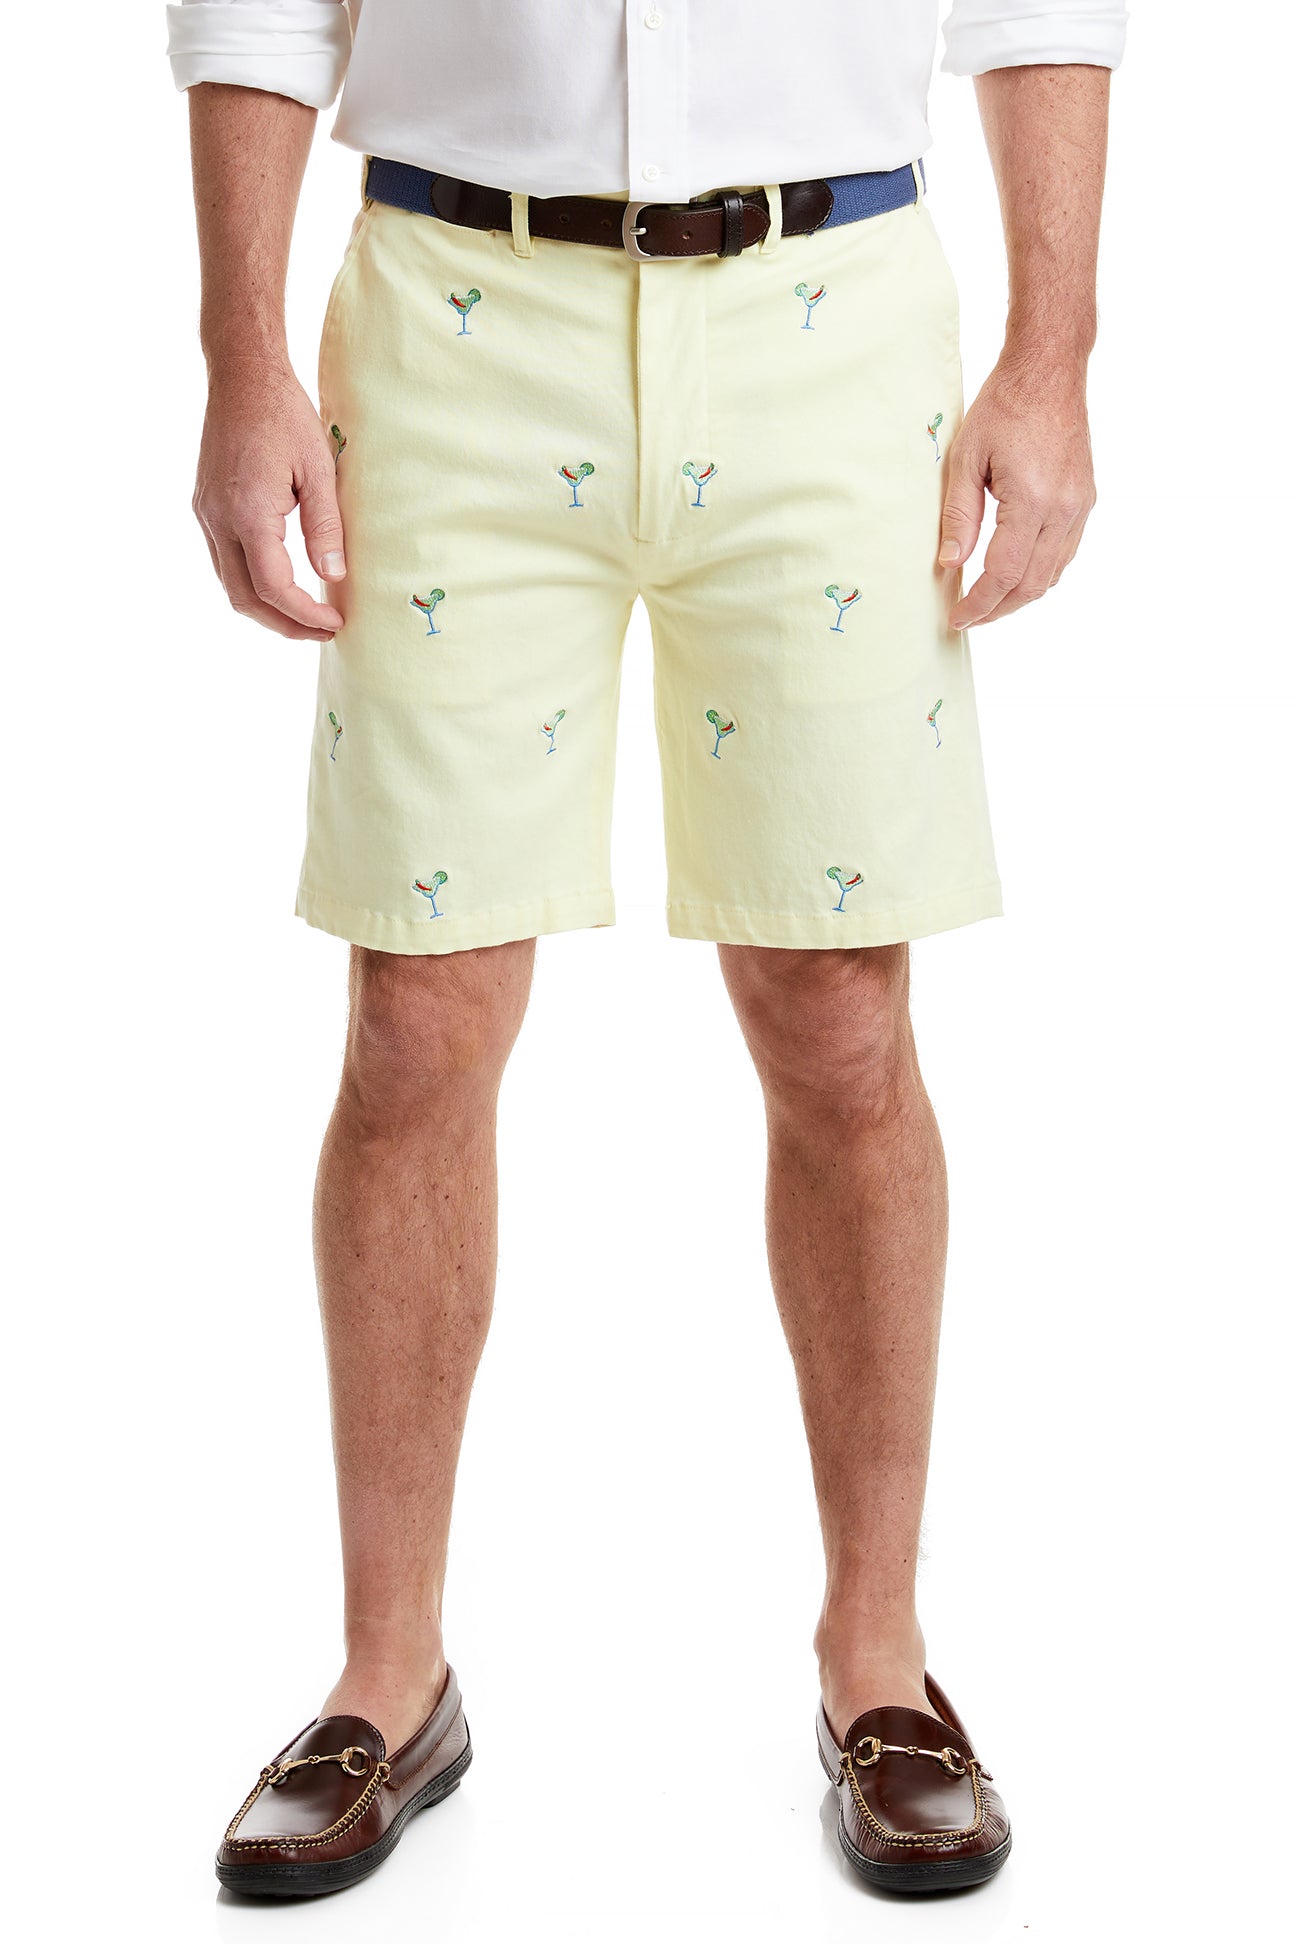 Cisco Short Neon Yellow with Spicy Margarita MENS EMBROIDERED SHORTS Castaway Nantucket Island